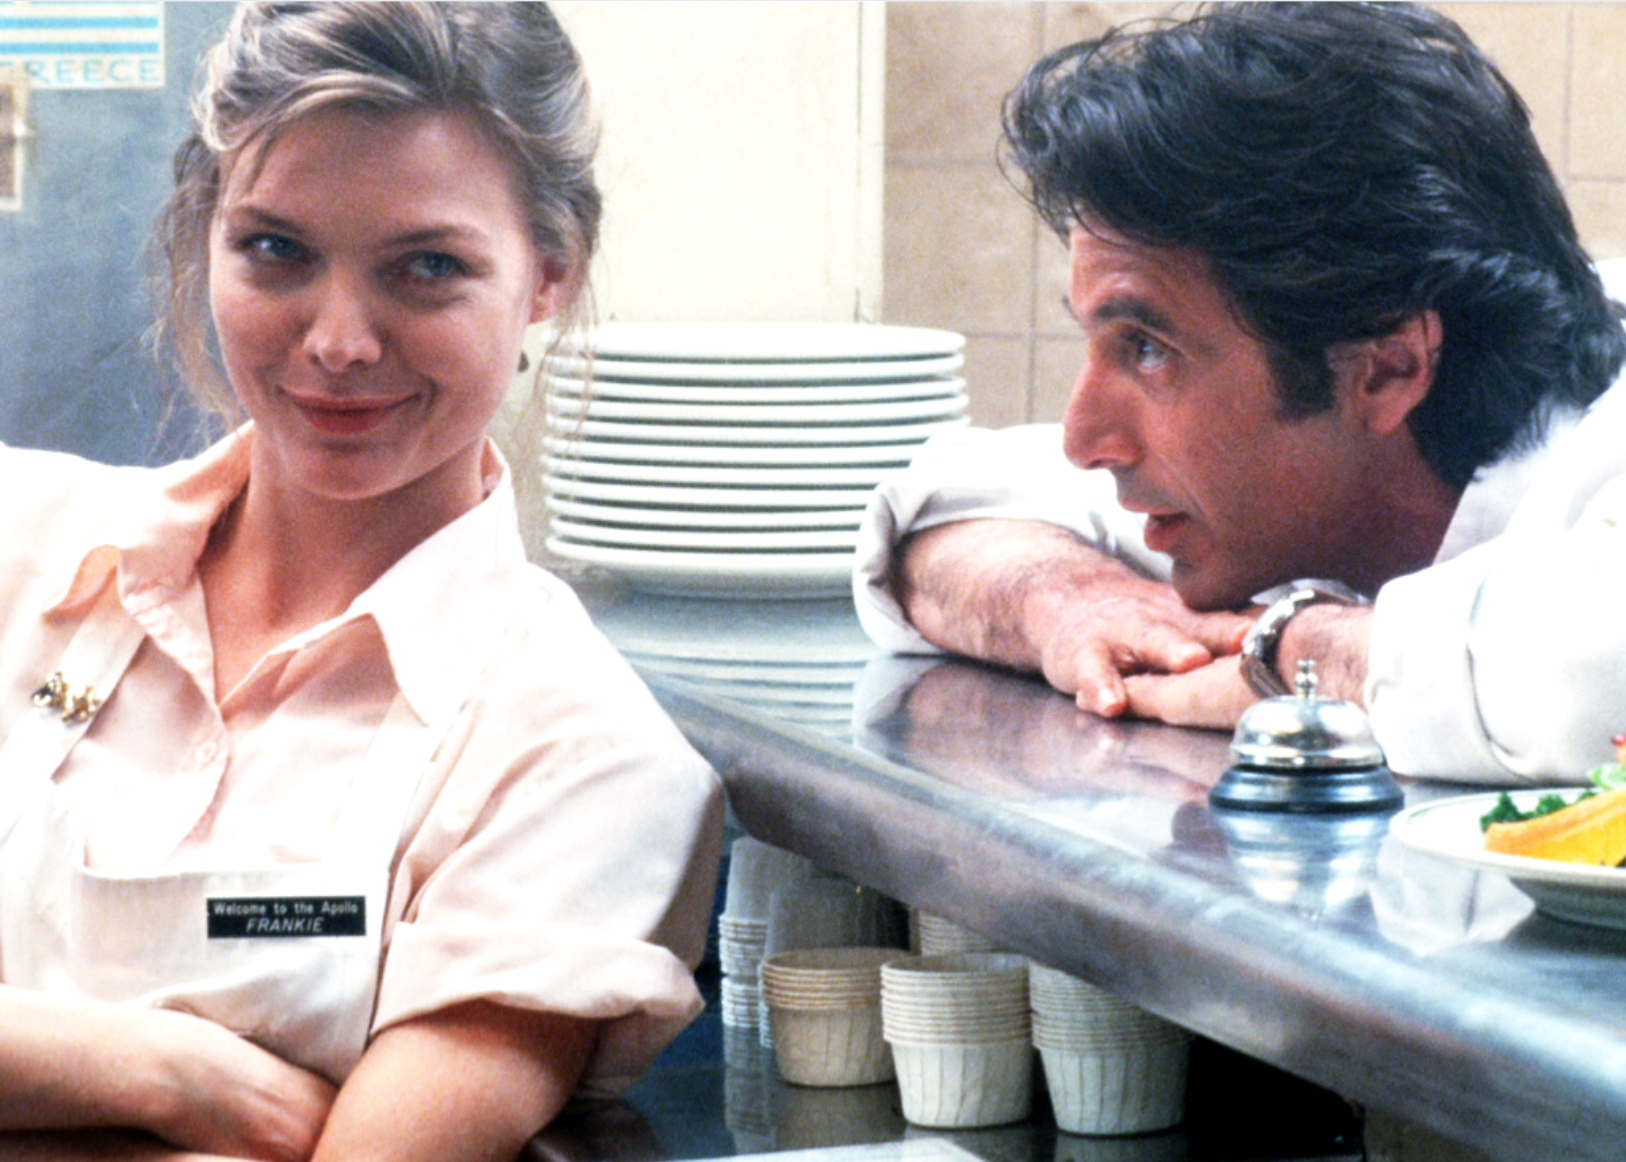 Al Pacino in a scene from 'Frankie and Johnny’.